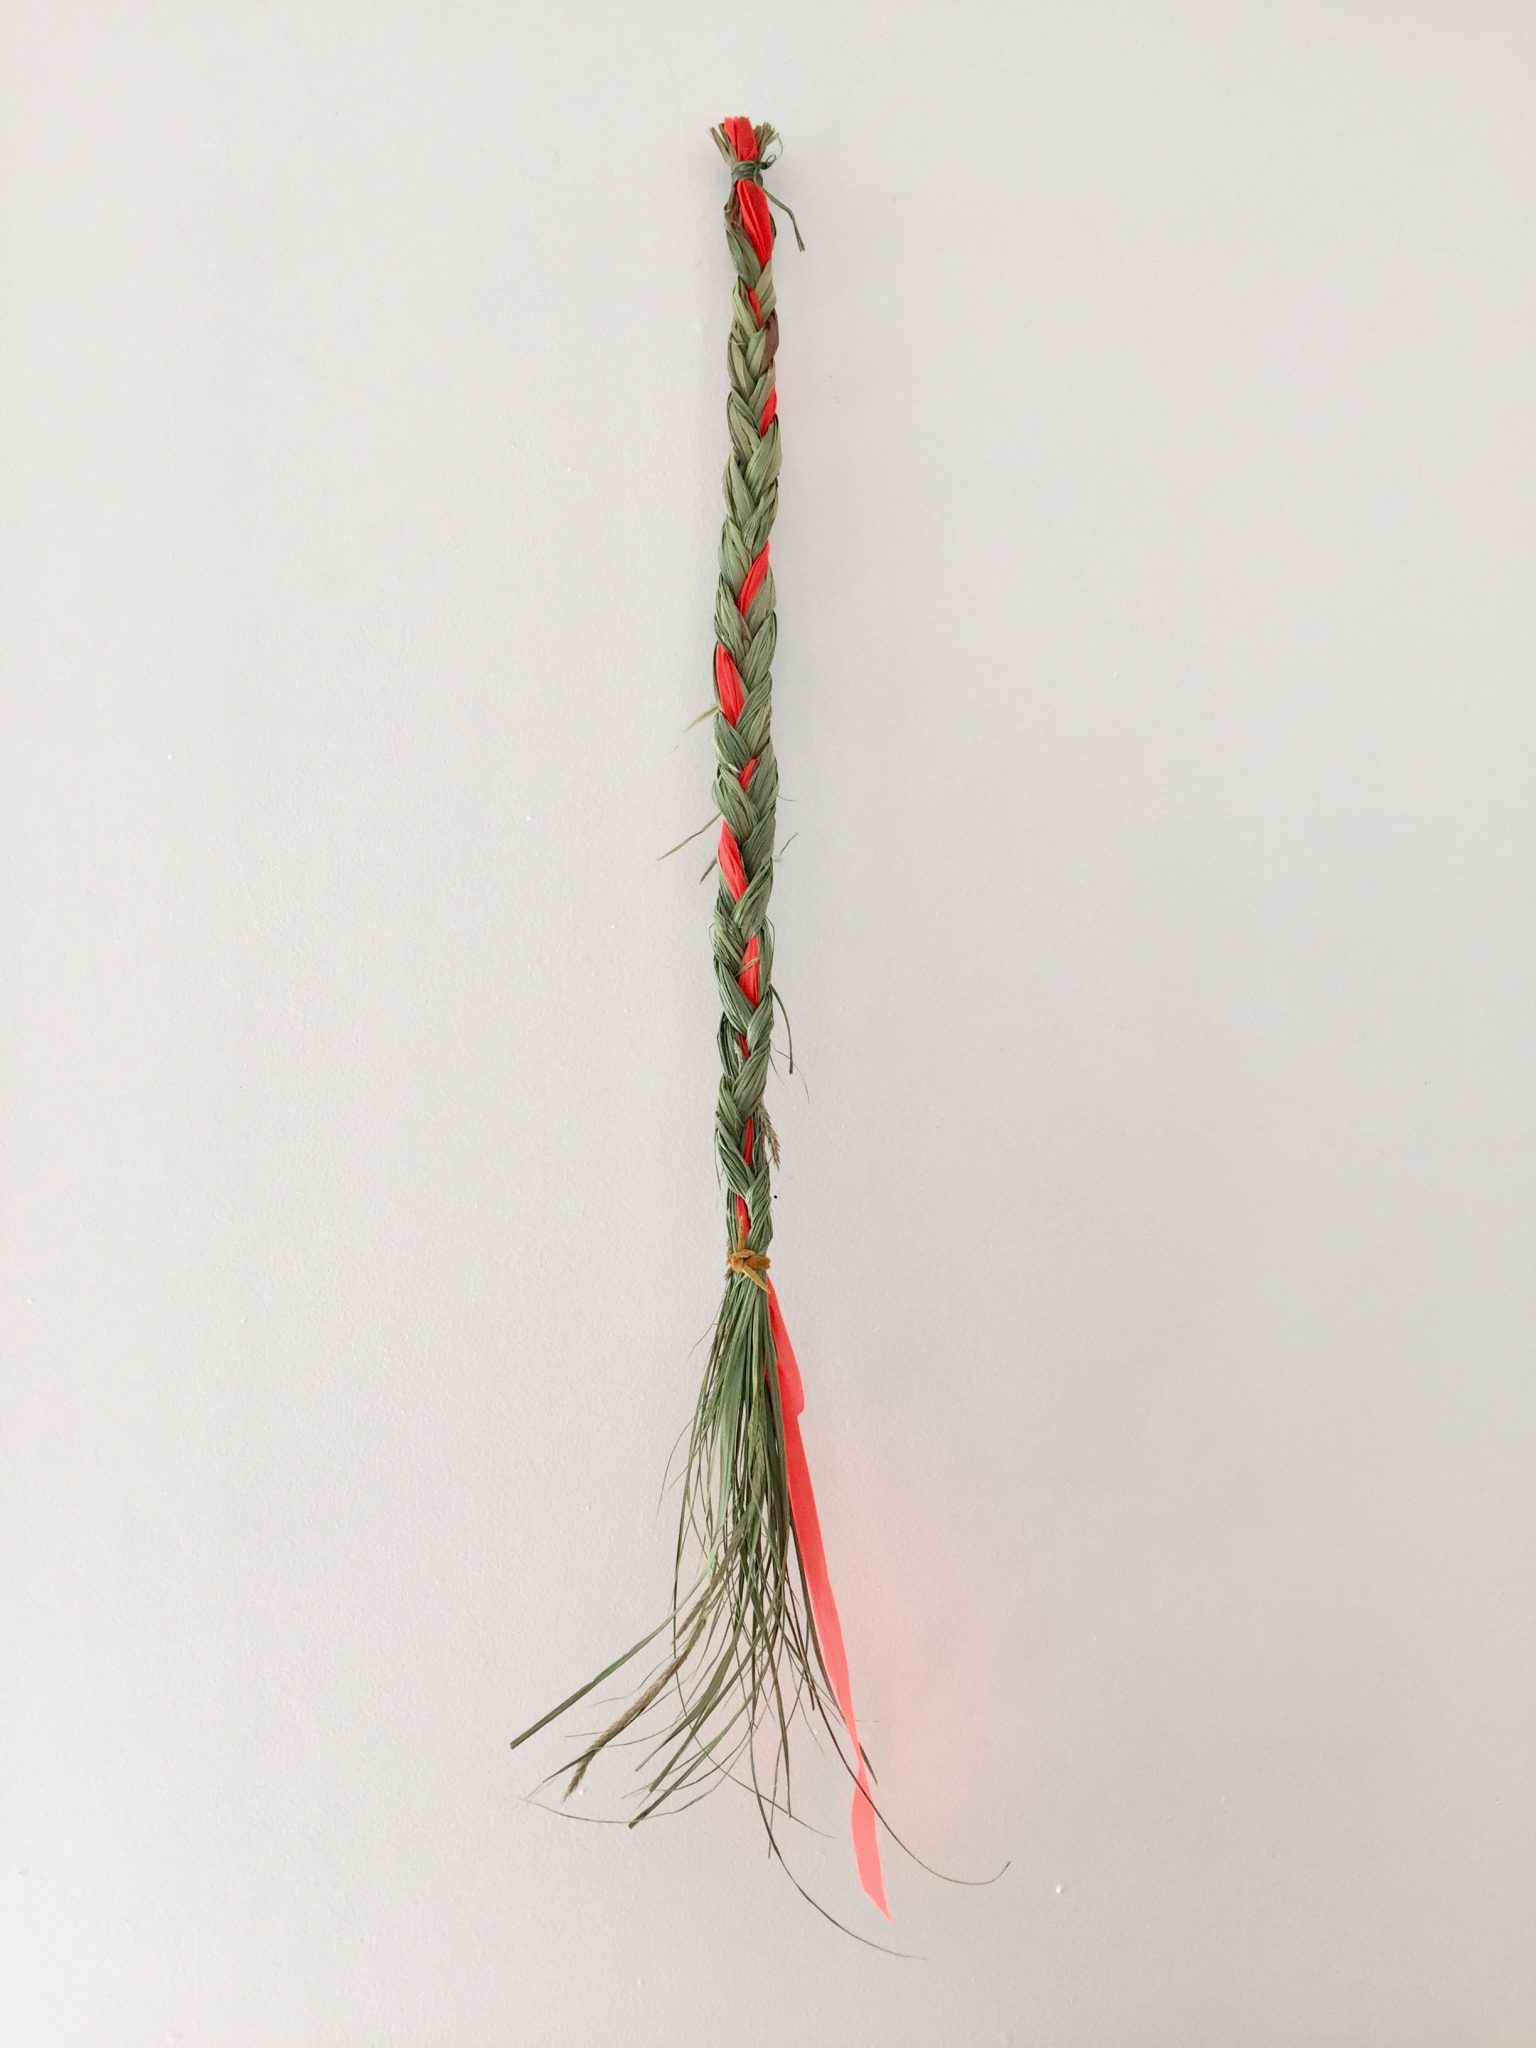 Braided Sweetgrass with a piece of orange flagging tape woven into it.